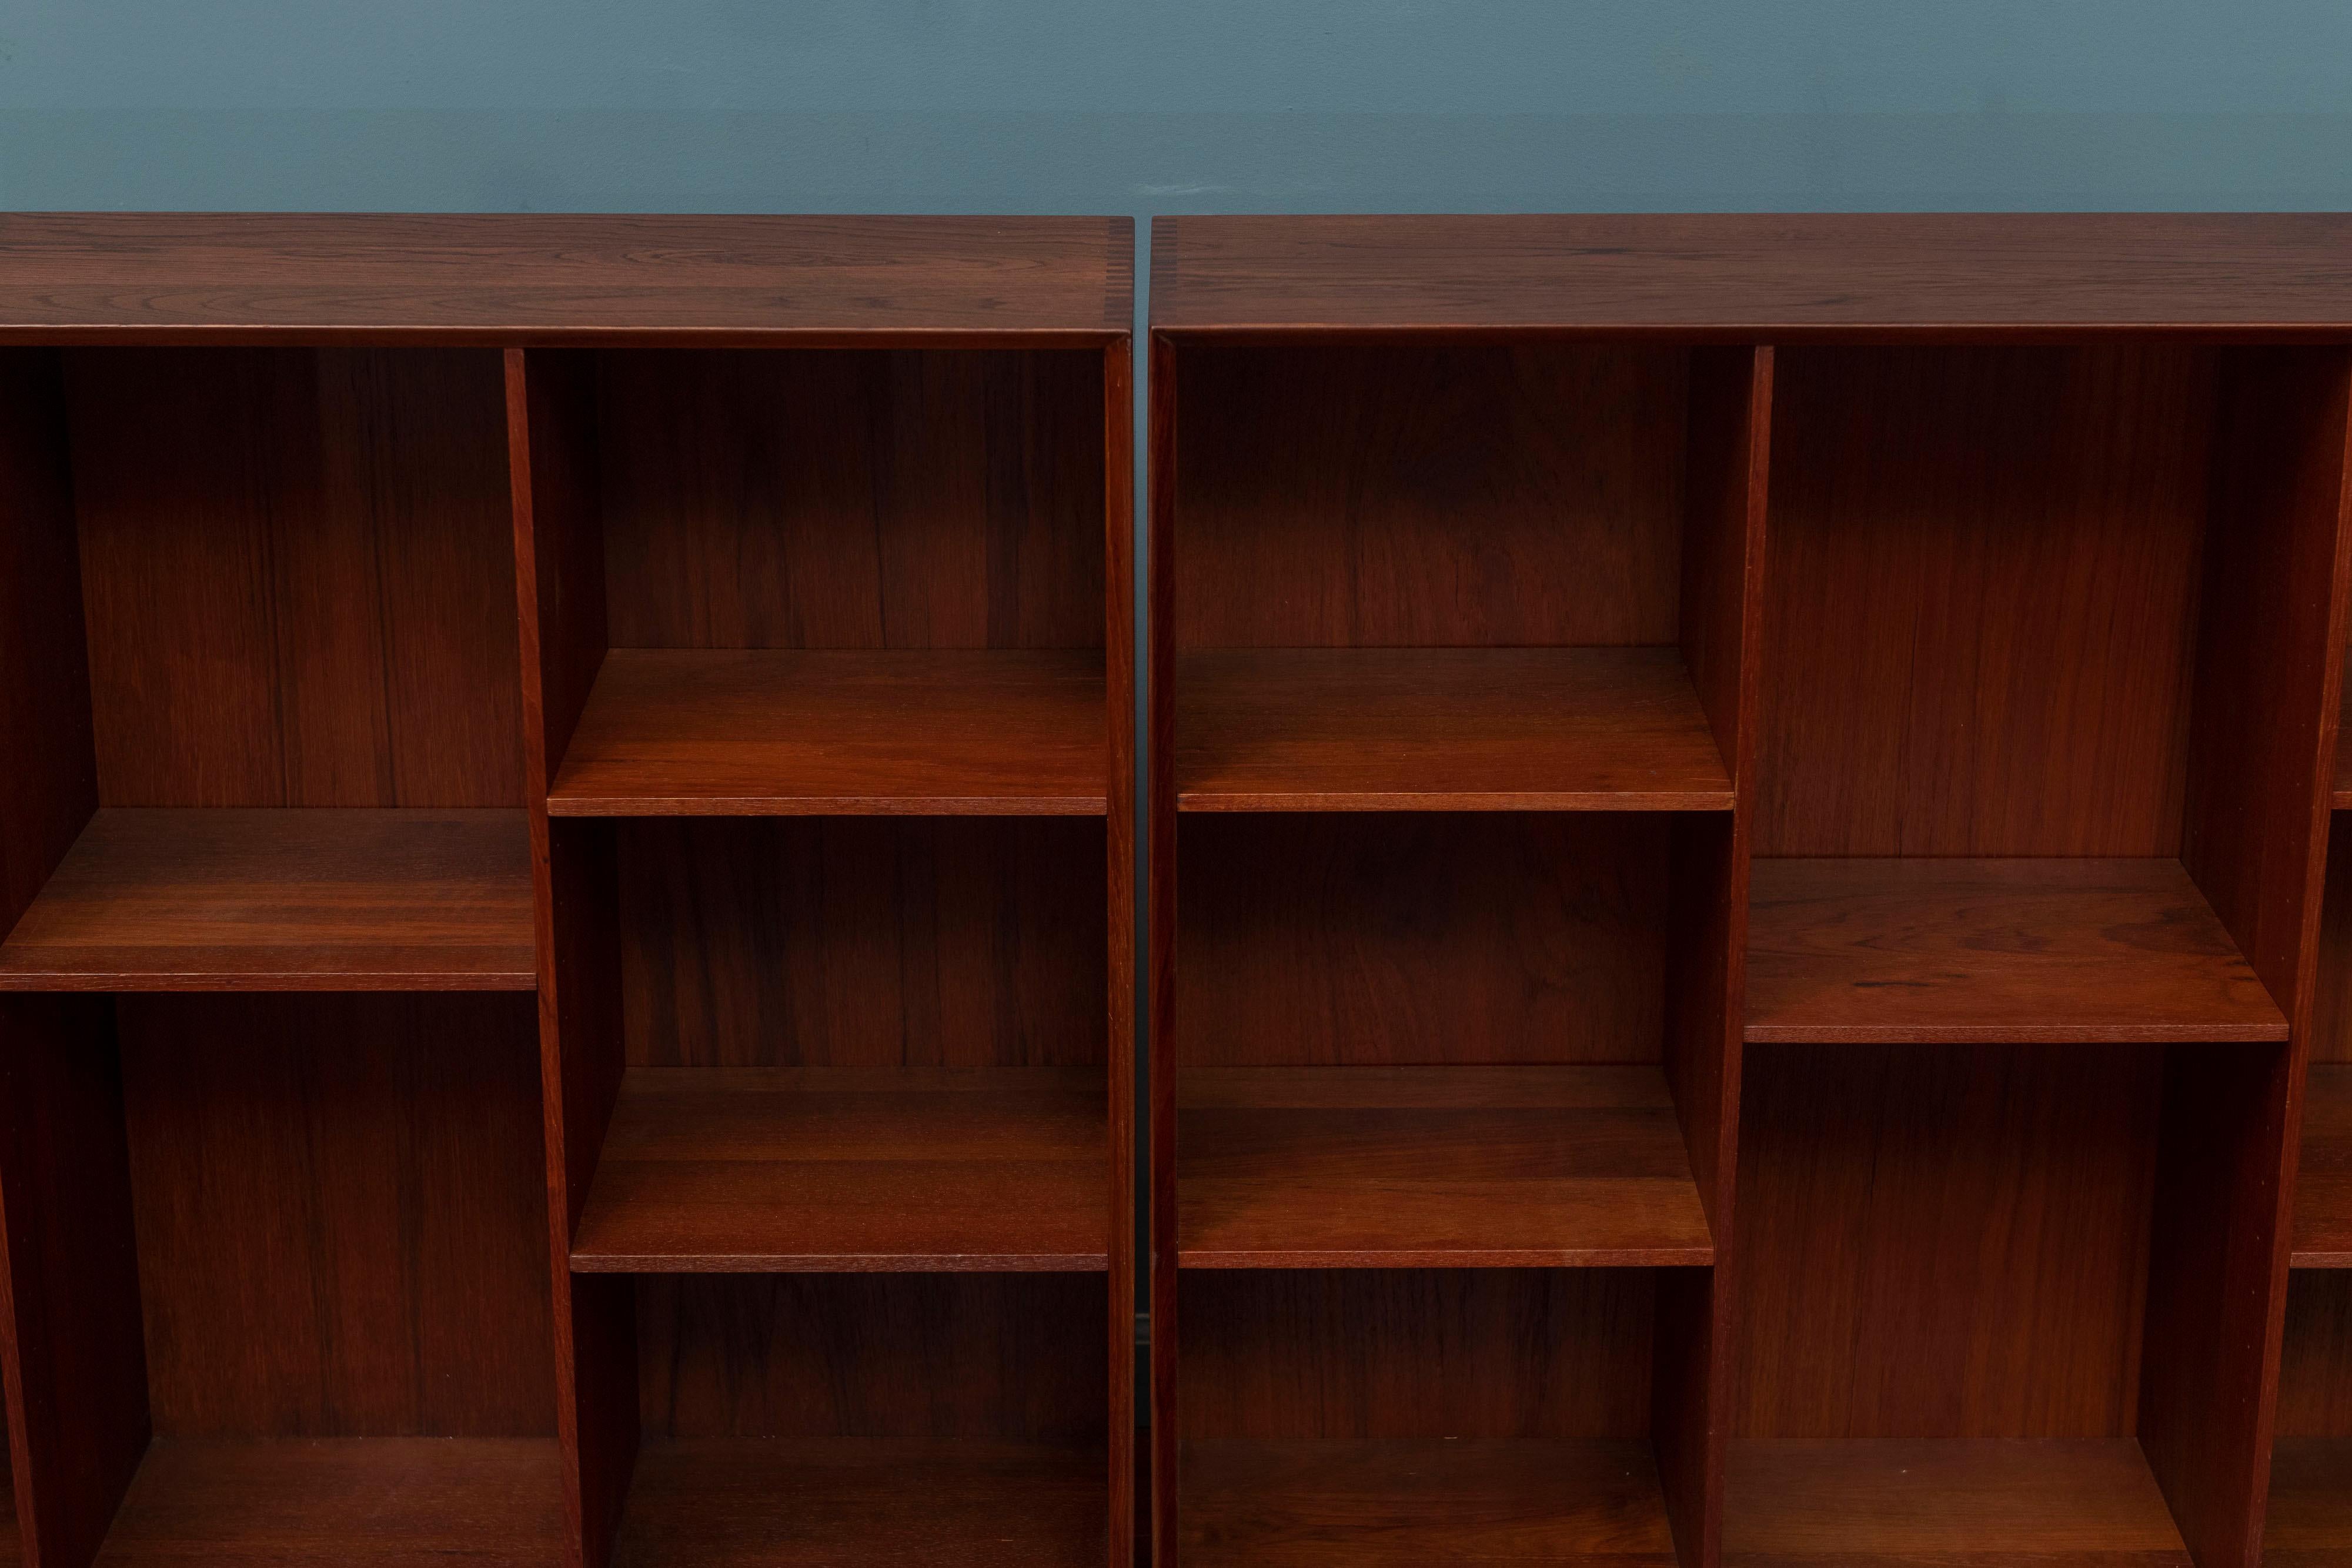 Peter Hvidt & Orla Moregaard-Nielsen design solid teak bookcases. Newly refinished with adjustable shelves that are simple but sophisticated and displays books or collectibles perfectly. Ready to install and enjoy.